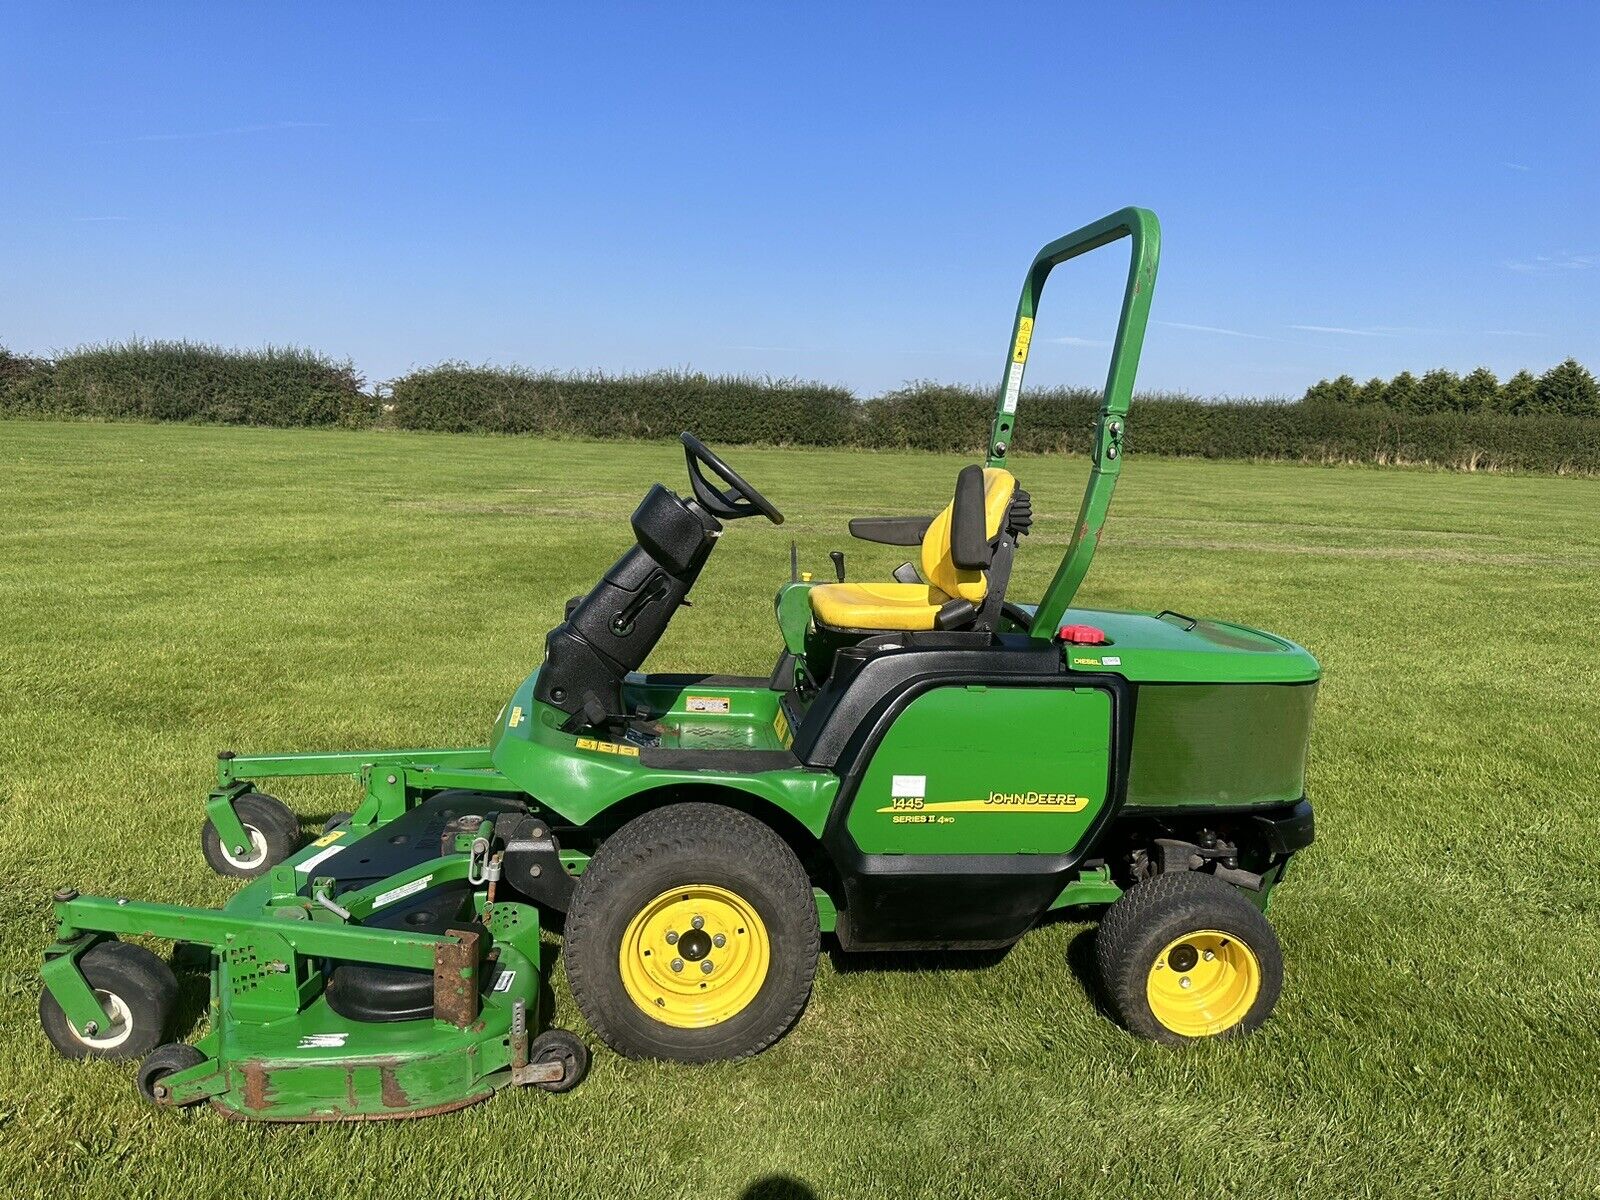 2014 JOHN DEERE 1445 OUTFRONT COMMERCIAL DIESEL RIDE SIT ON LAWN MOWER